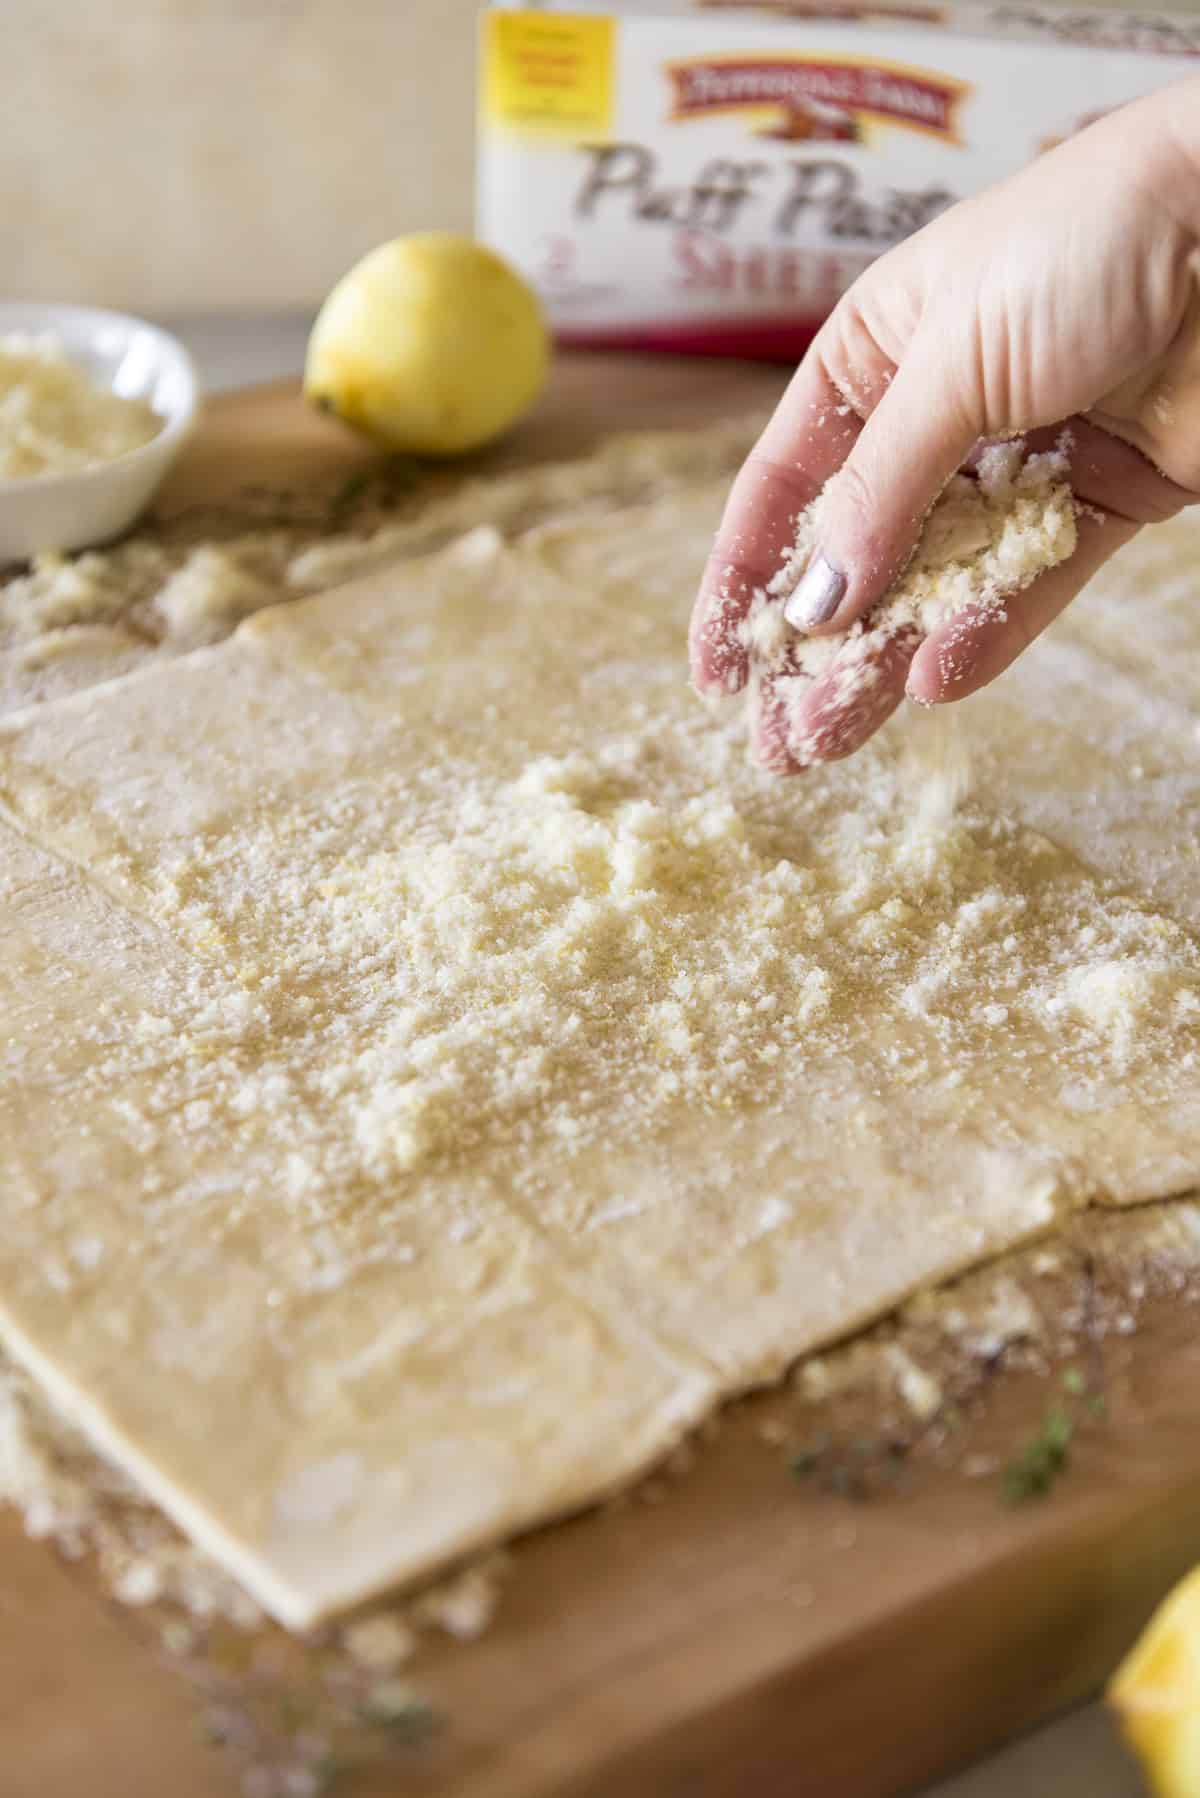 A person sprinkling sugar on a sheet of puff pastry on a wooden board, with a lemon in the background.